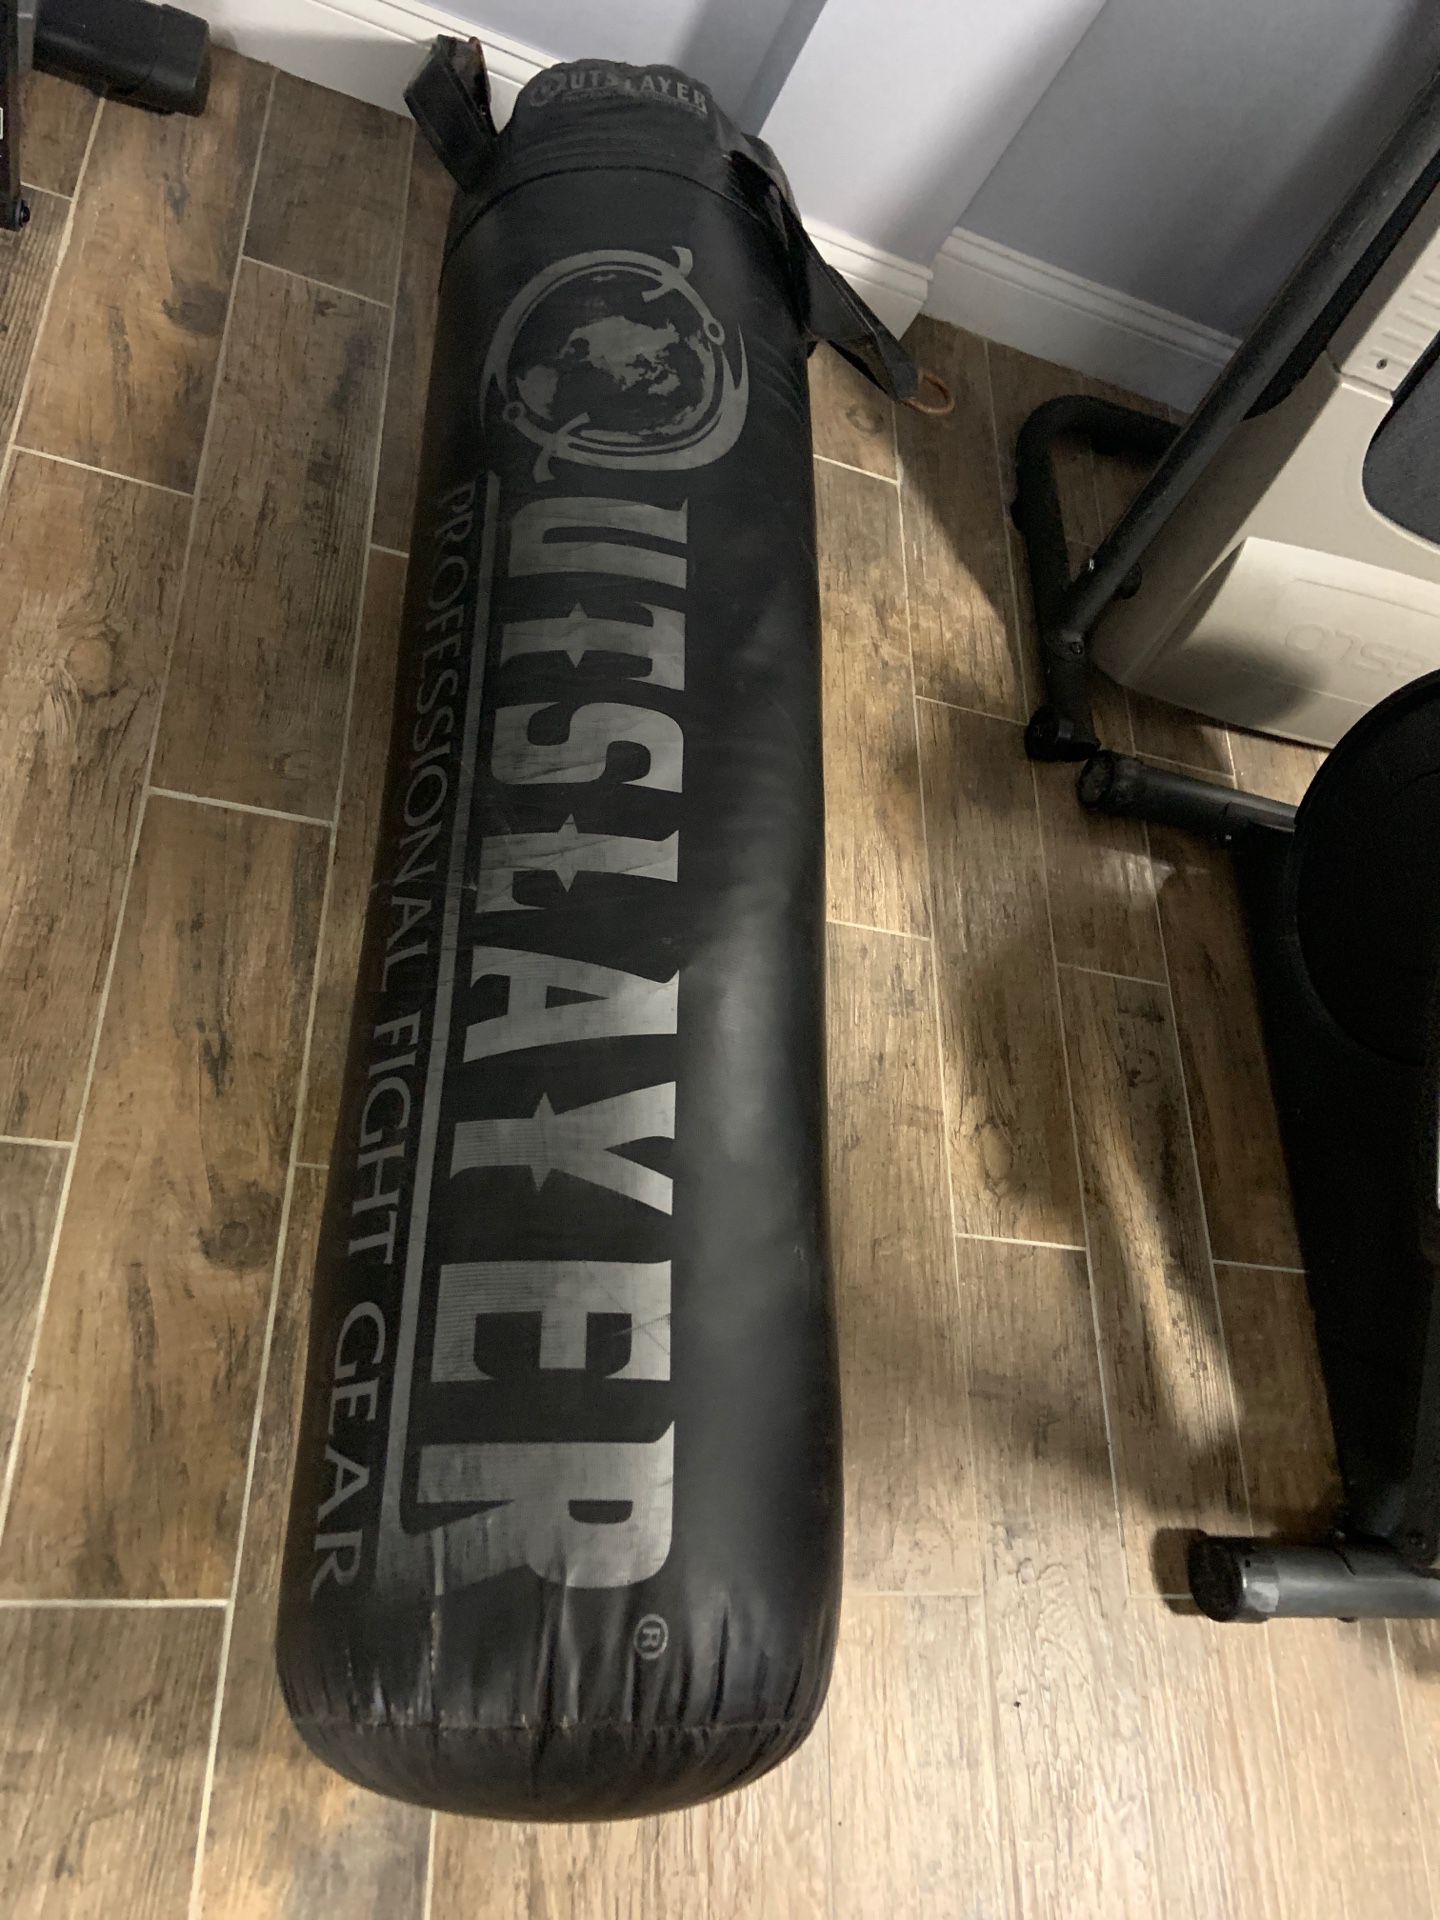 UTSLAYER professional fight gear 300LB+ punching bag